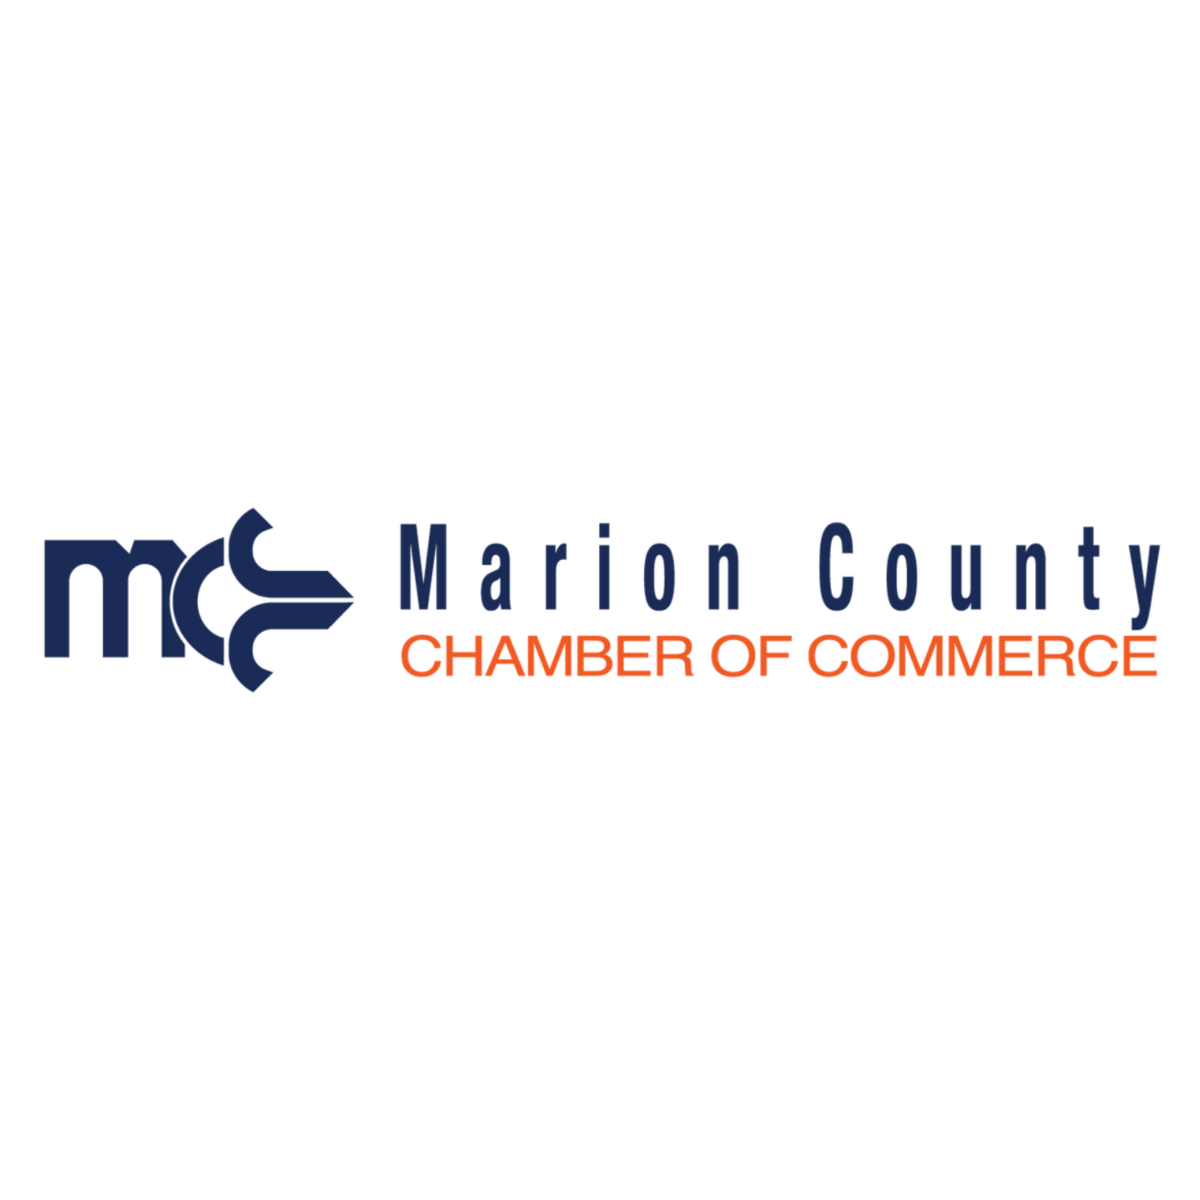 Marion County Chamber of Commerce